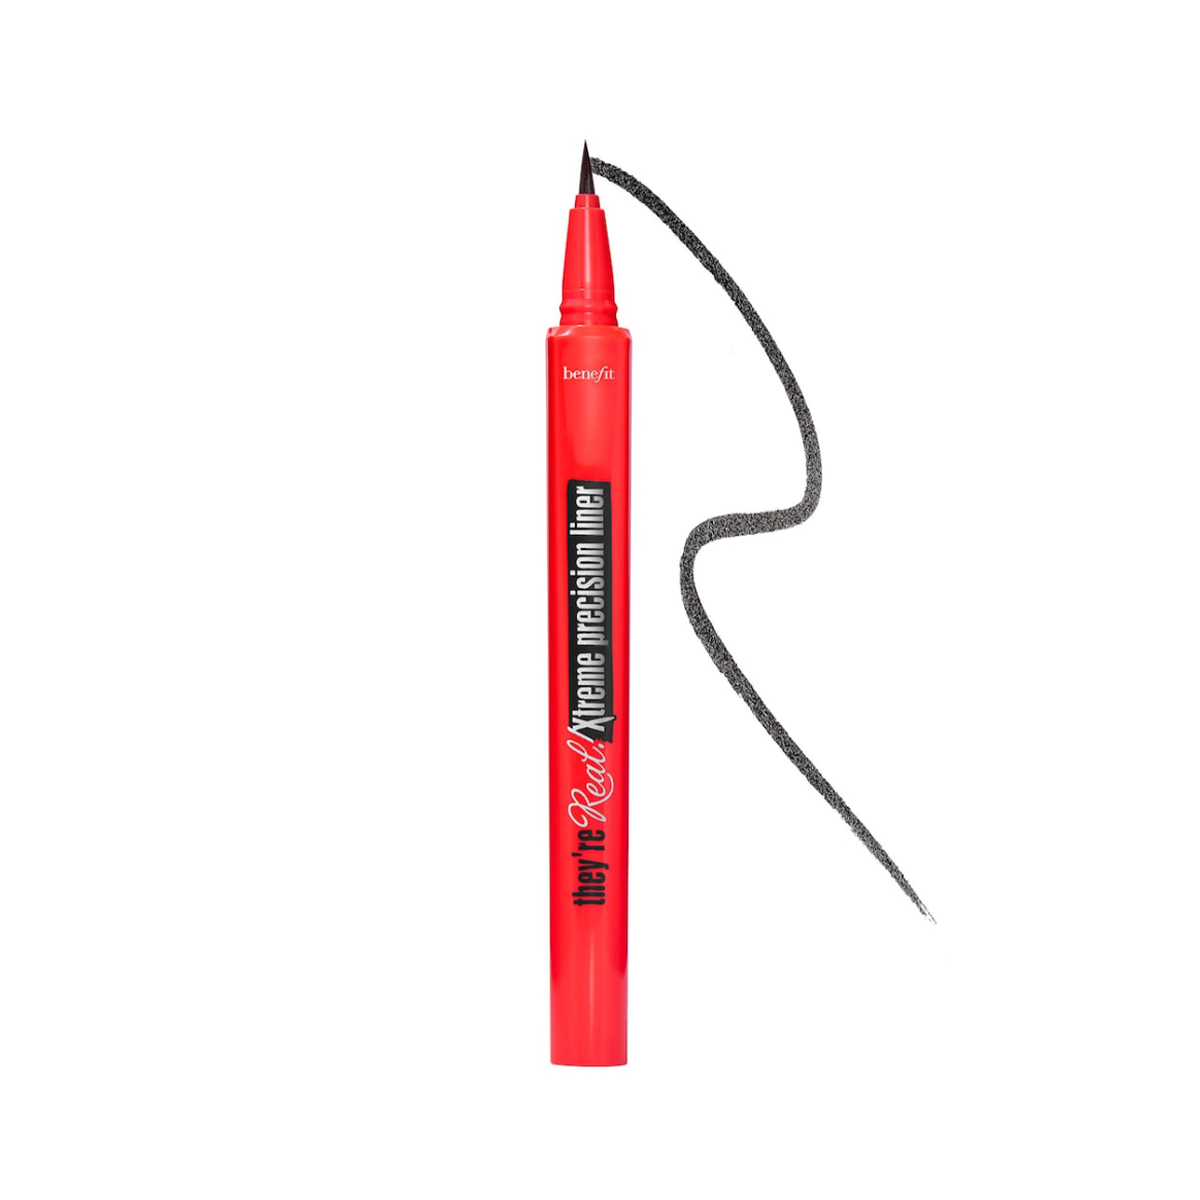 Benefit Cosmetics They're Real! Xtreme Precision Eye Liner